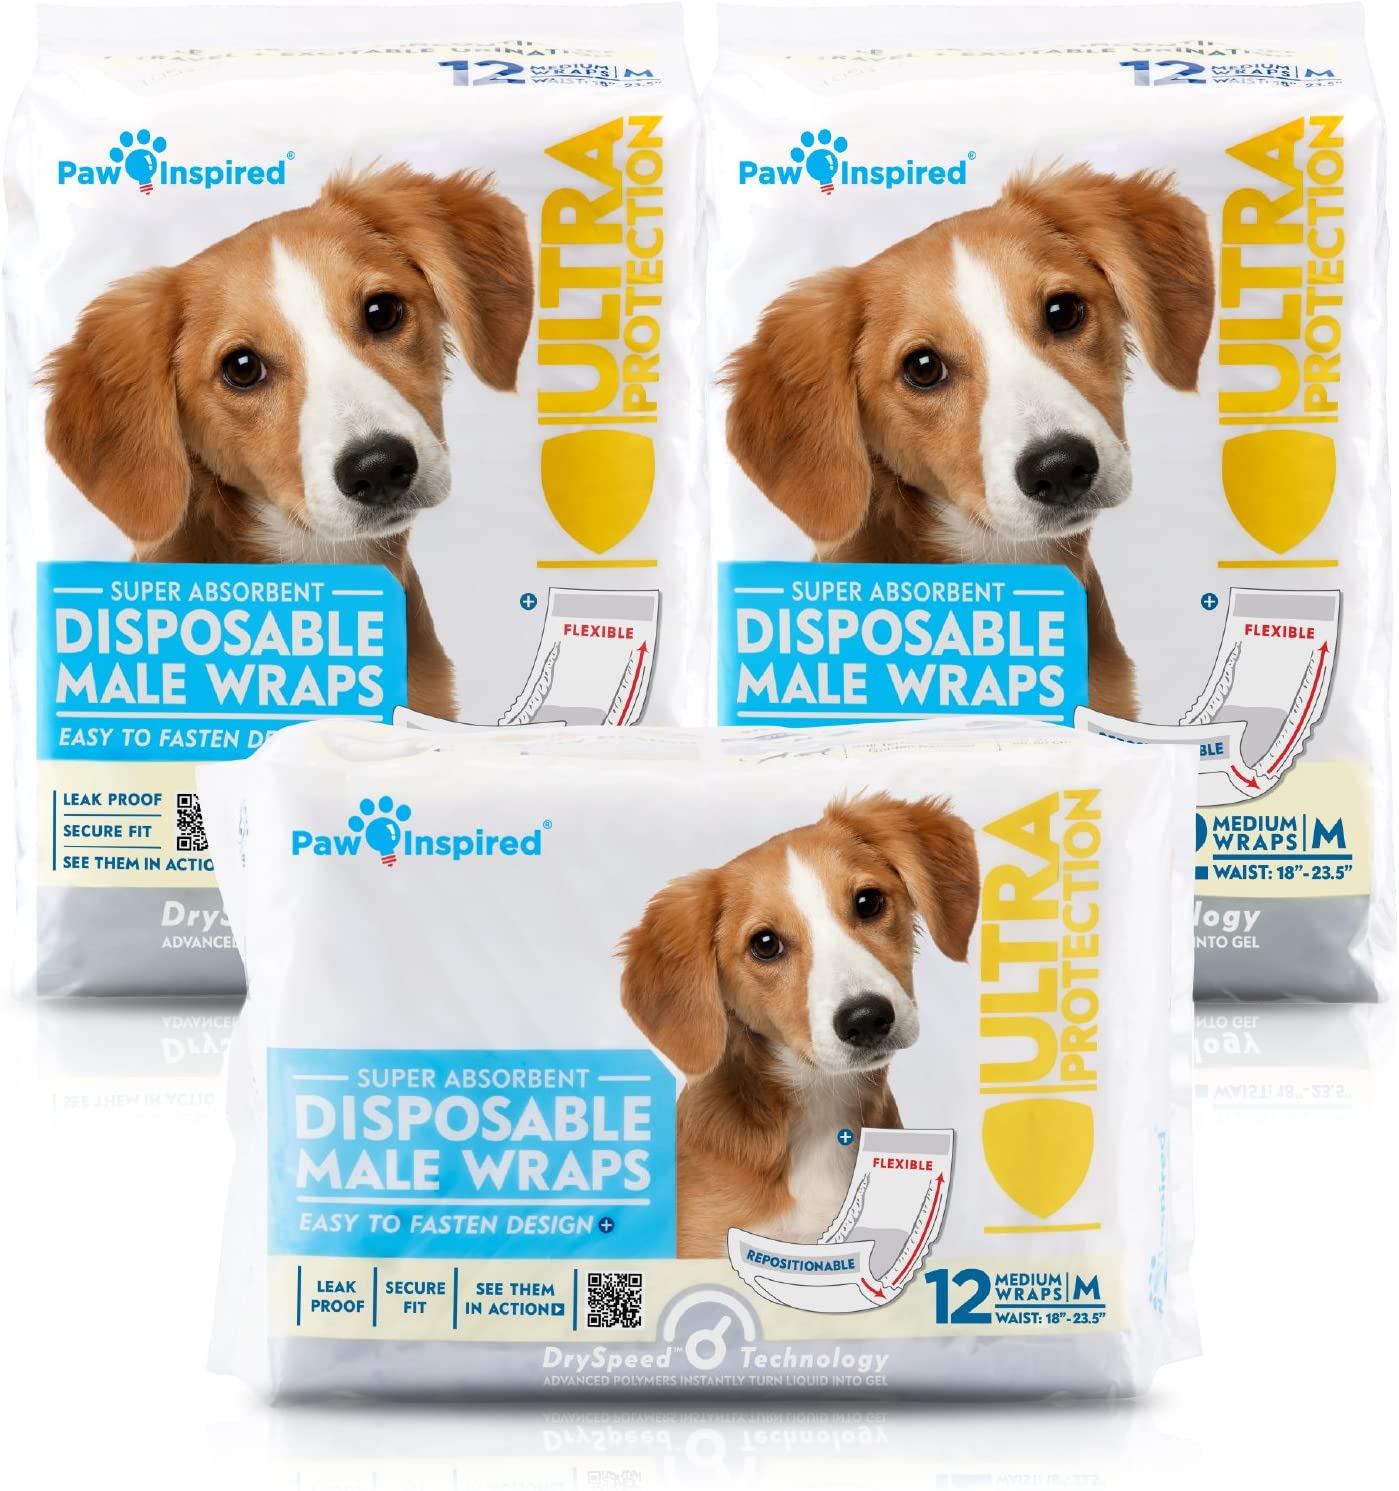 3. Paw Inspired Belly Band Diapers